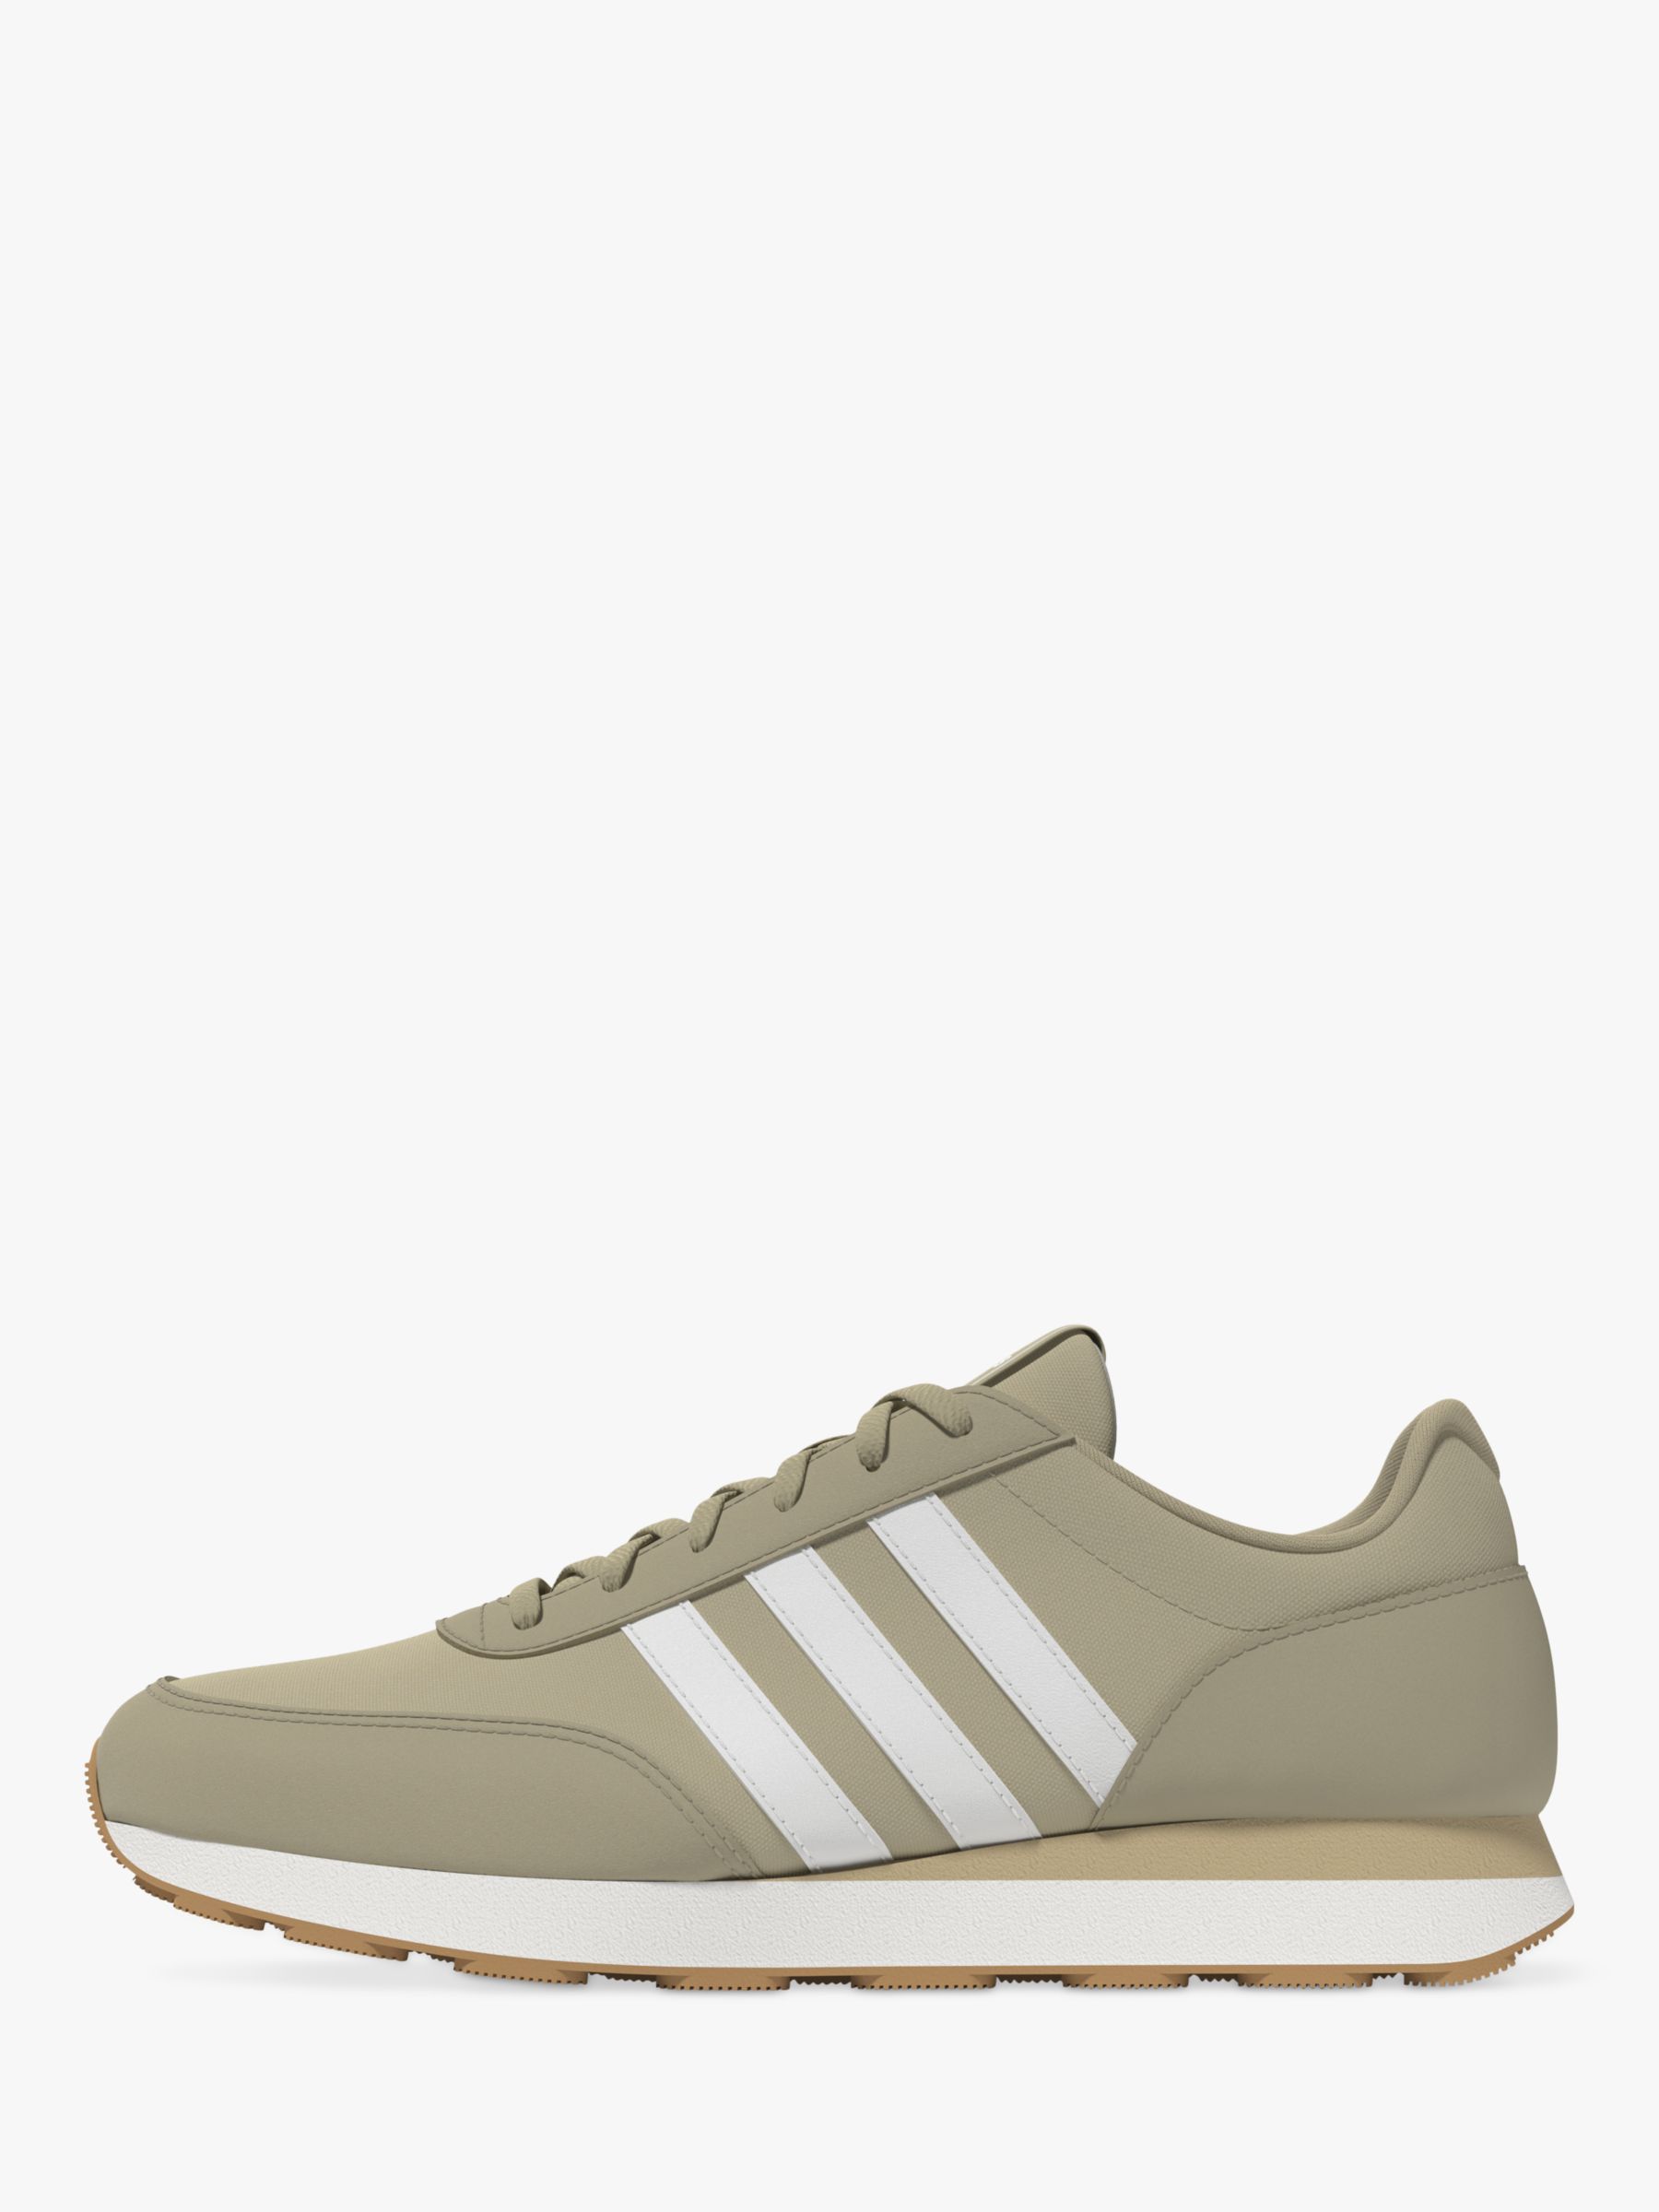 adidas Run 60s Trainers, Camel/white at John Lewis & Partners